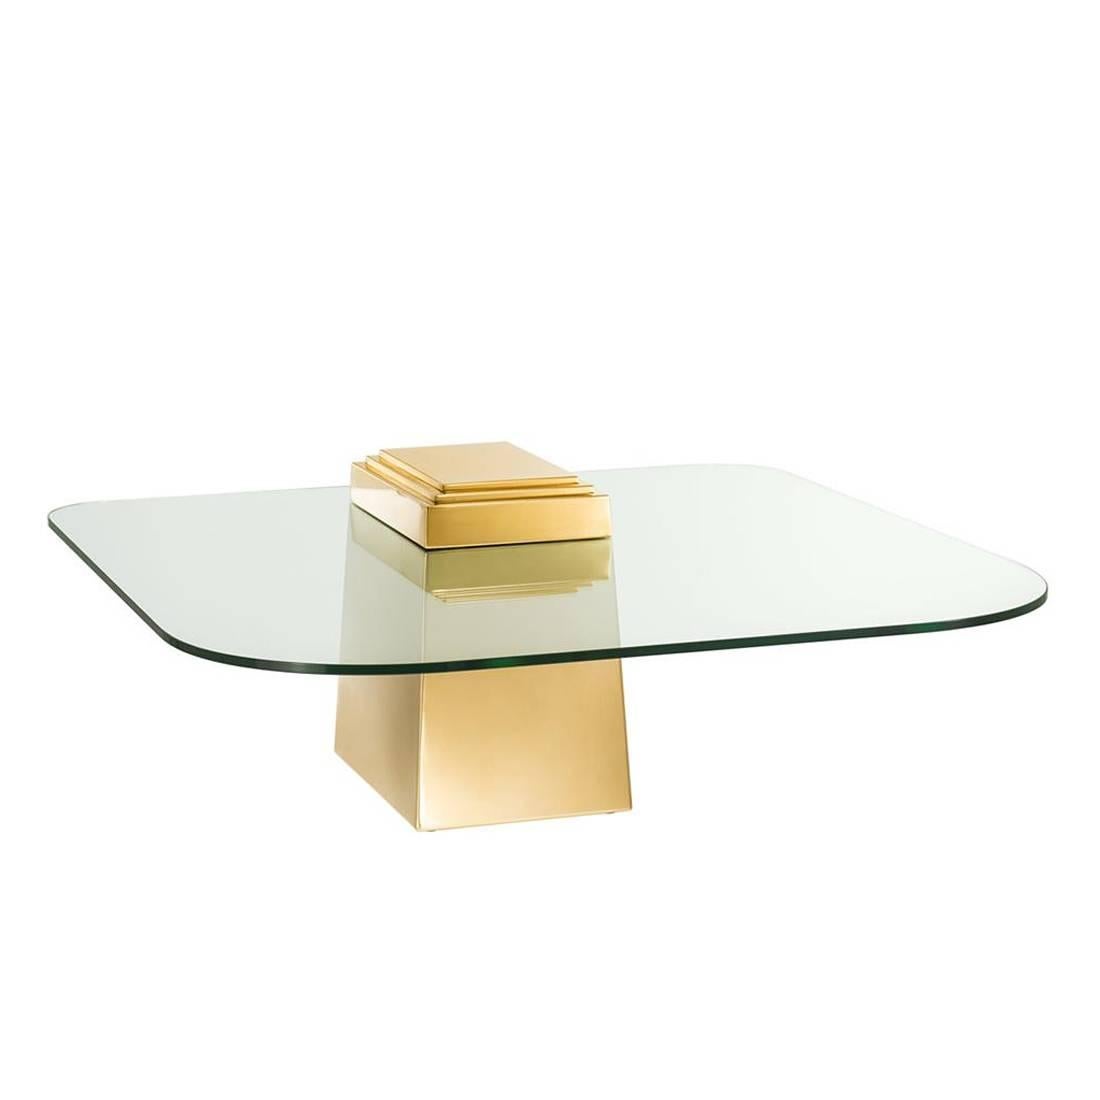 Coffee table Colisé with structure in polished stainless
steel in gold finish. With strong clear glass top.
Also available in polished stainless steel chrome finish.

 